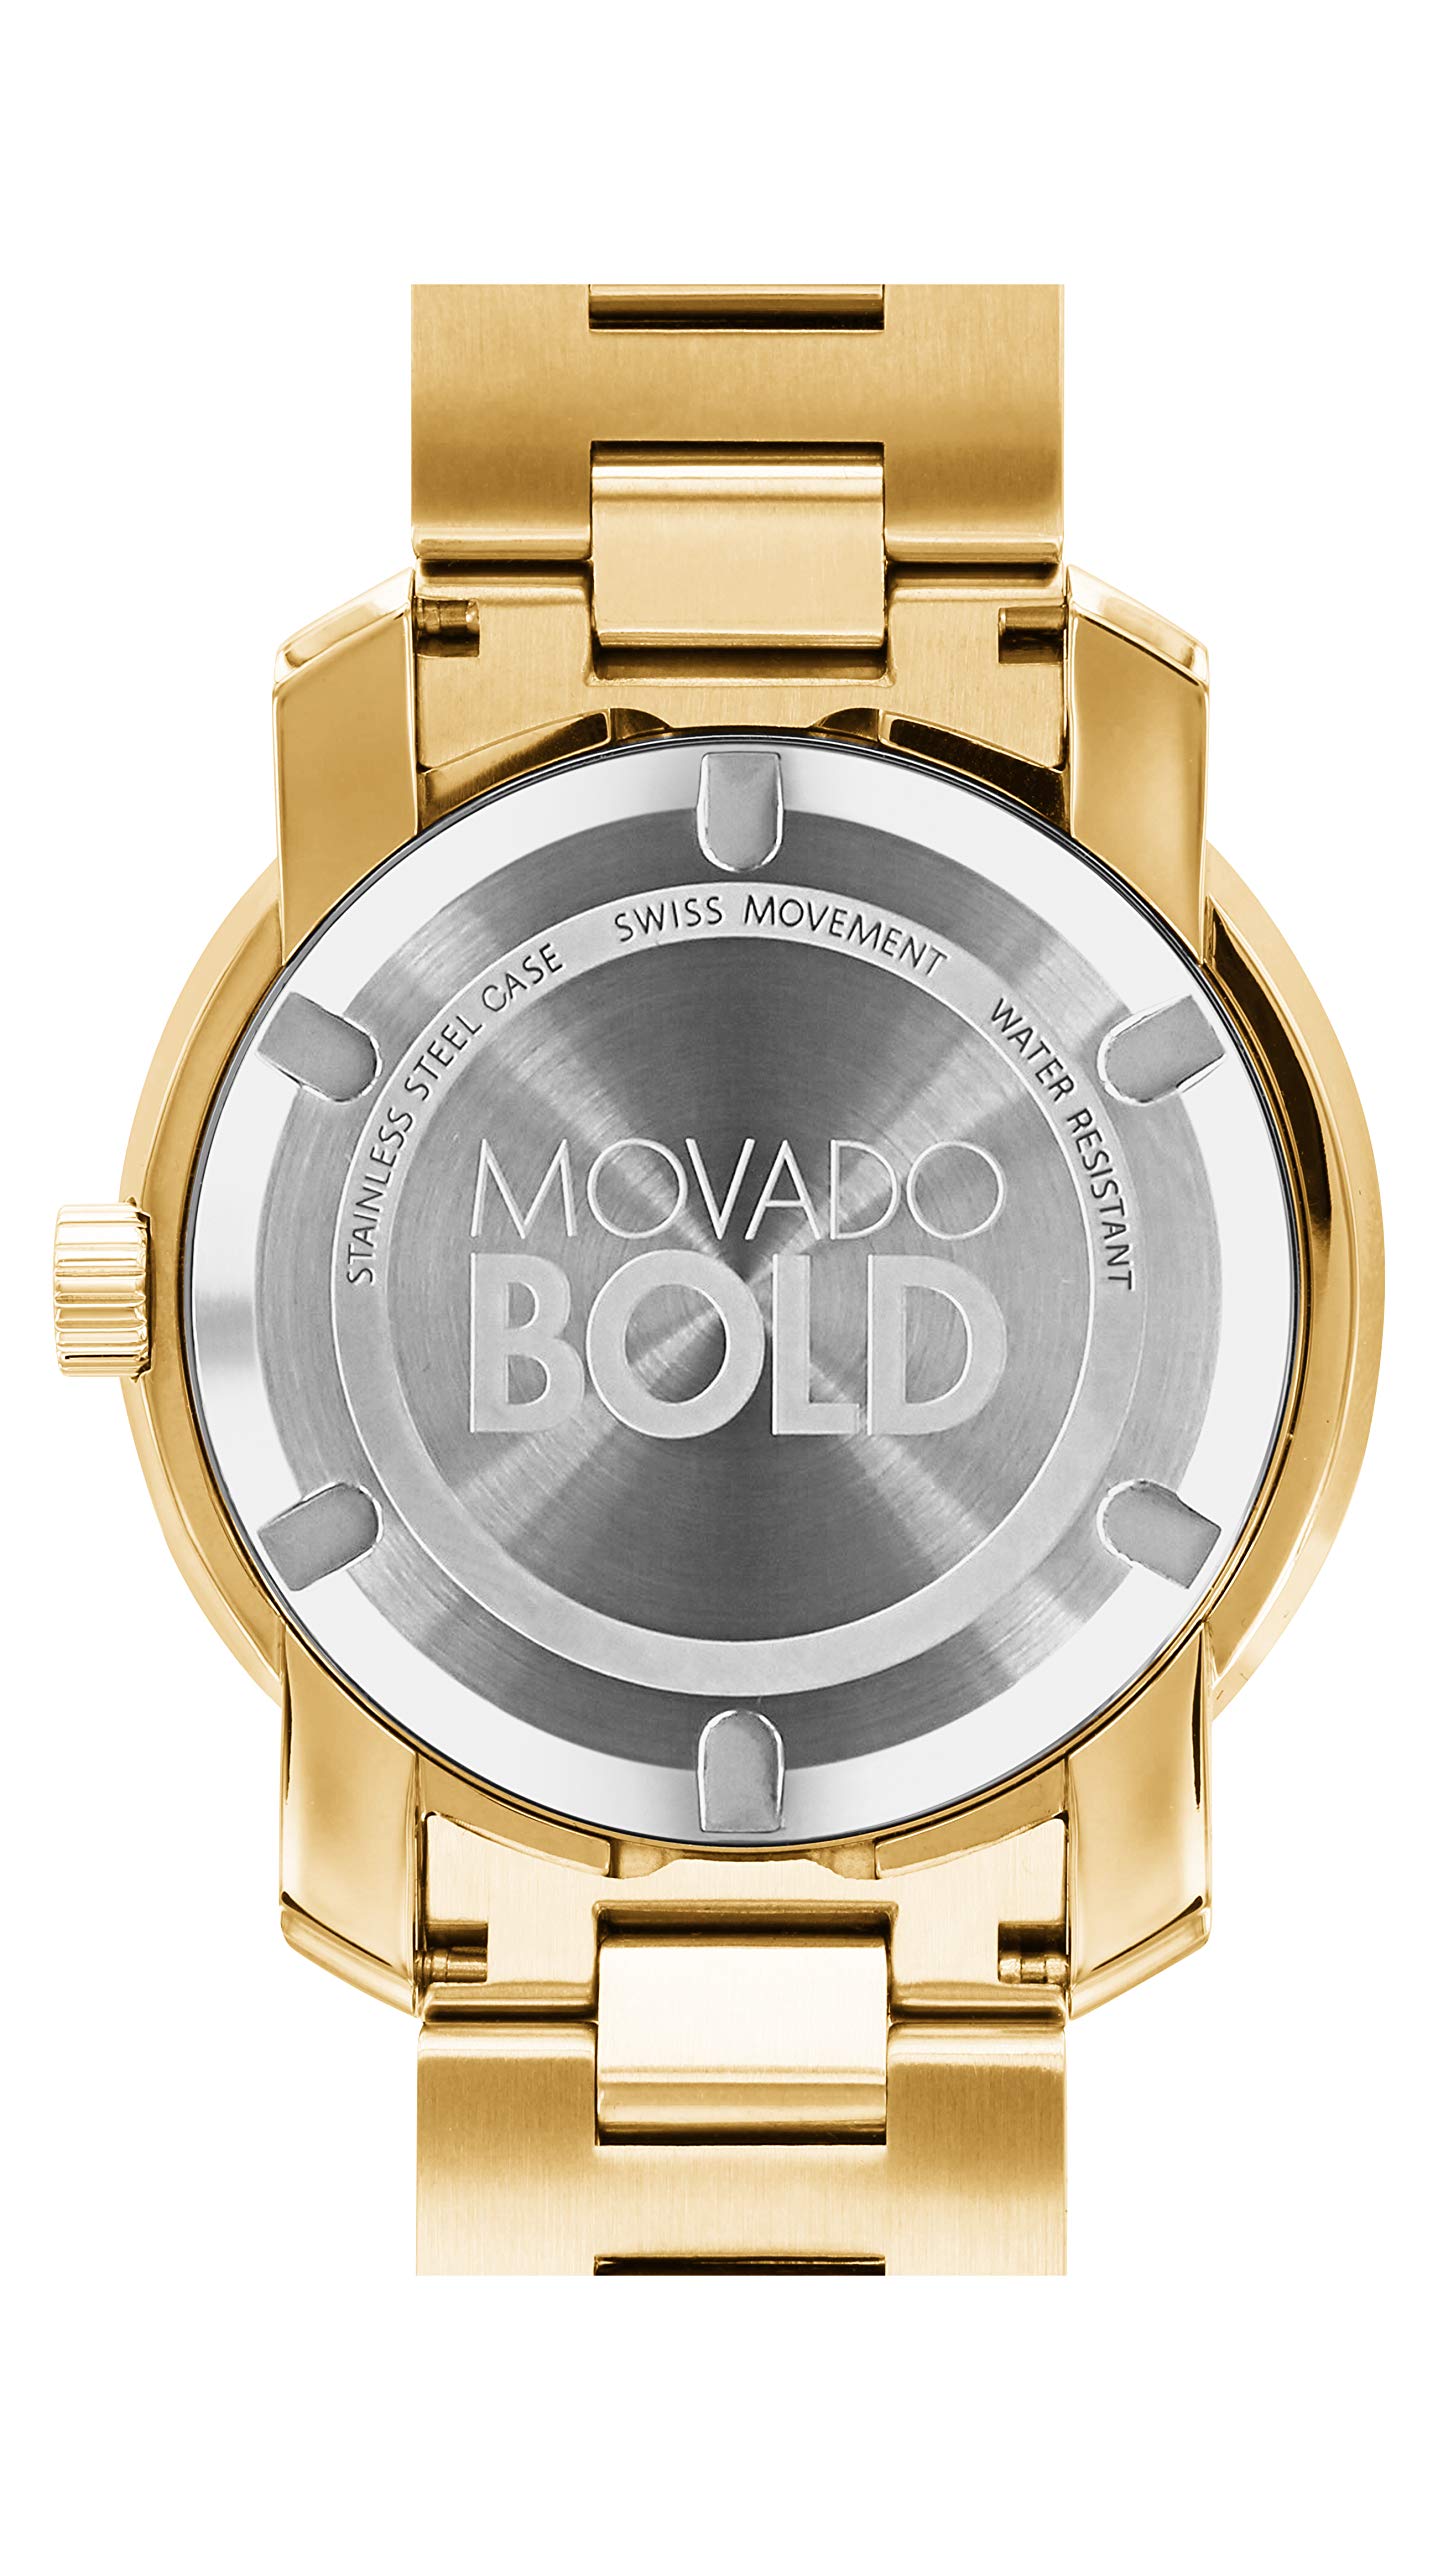 Movado Men's BOLD Metals Yellow Gold Watch with a Printed Index Dial, Gold (Model 3600258)